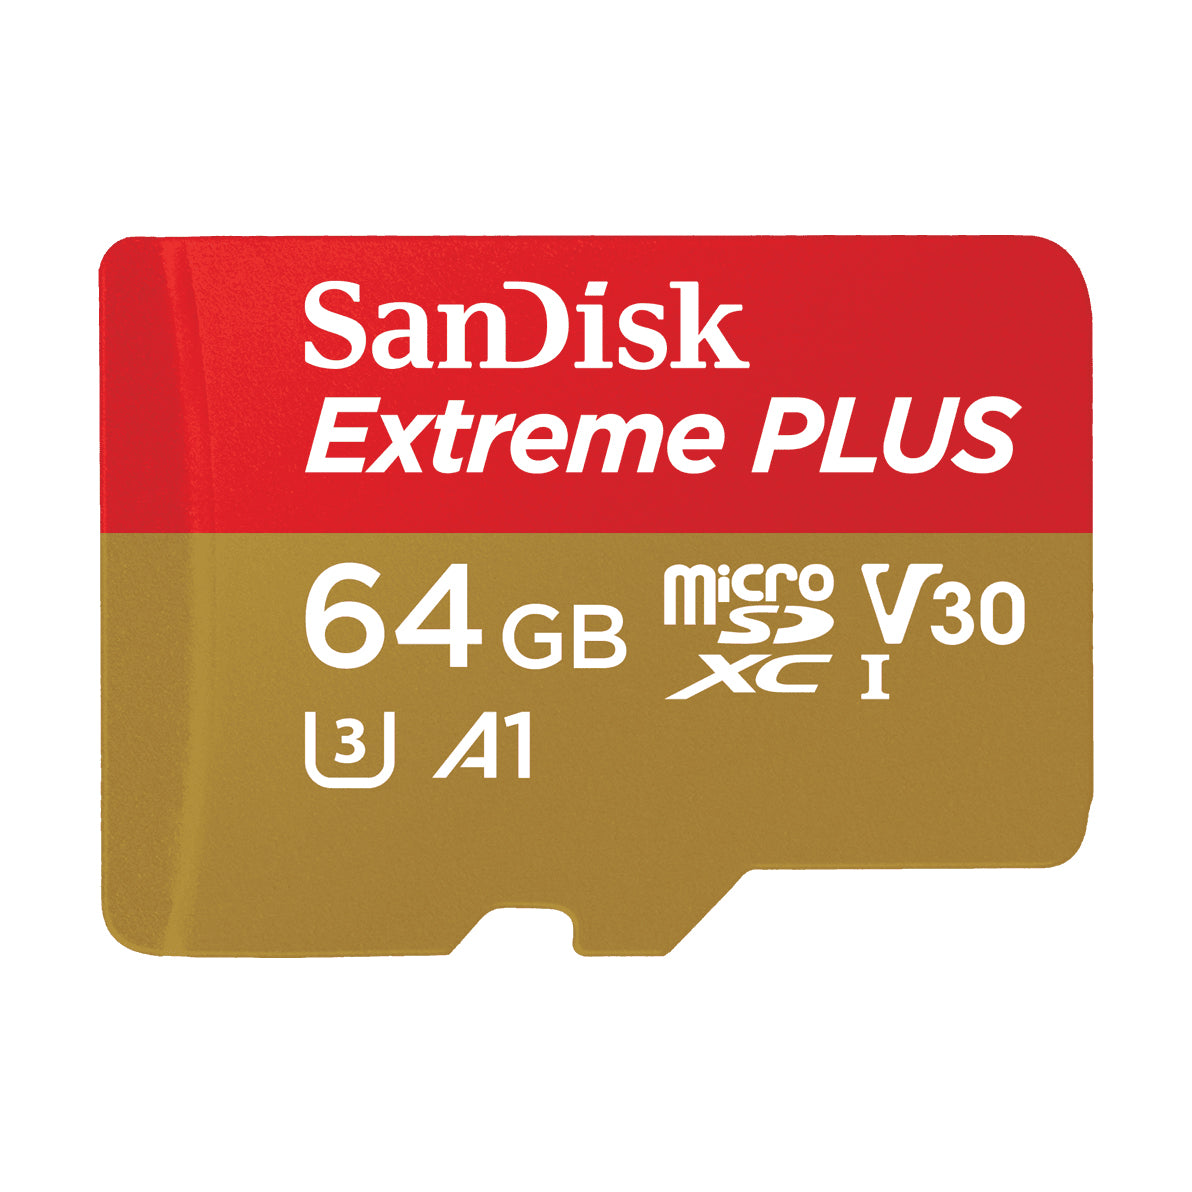 SanDisk Extreme Plus 64GB UHS-I microSDXC Memory Card with SD Adapter